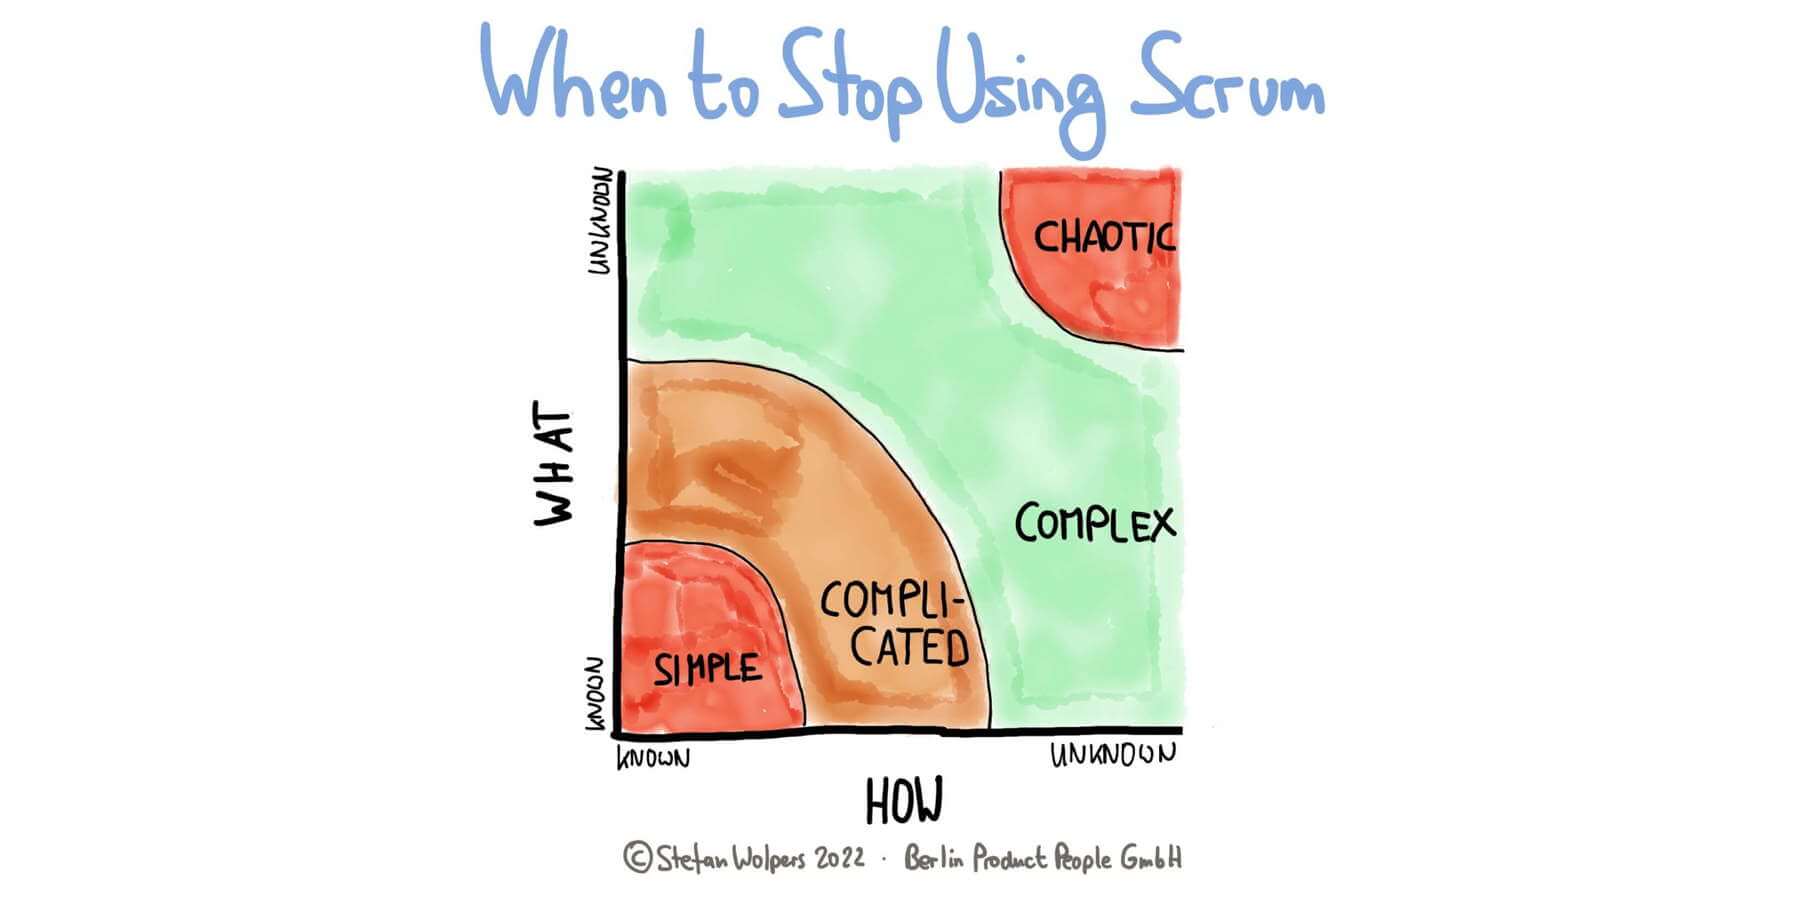 When Is It Time to Stop Using Scrum? Berlin-Product-People.com